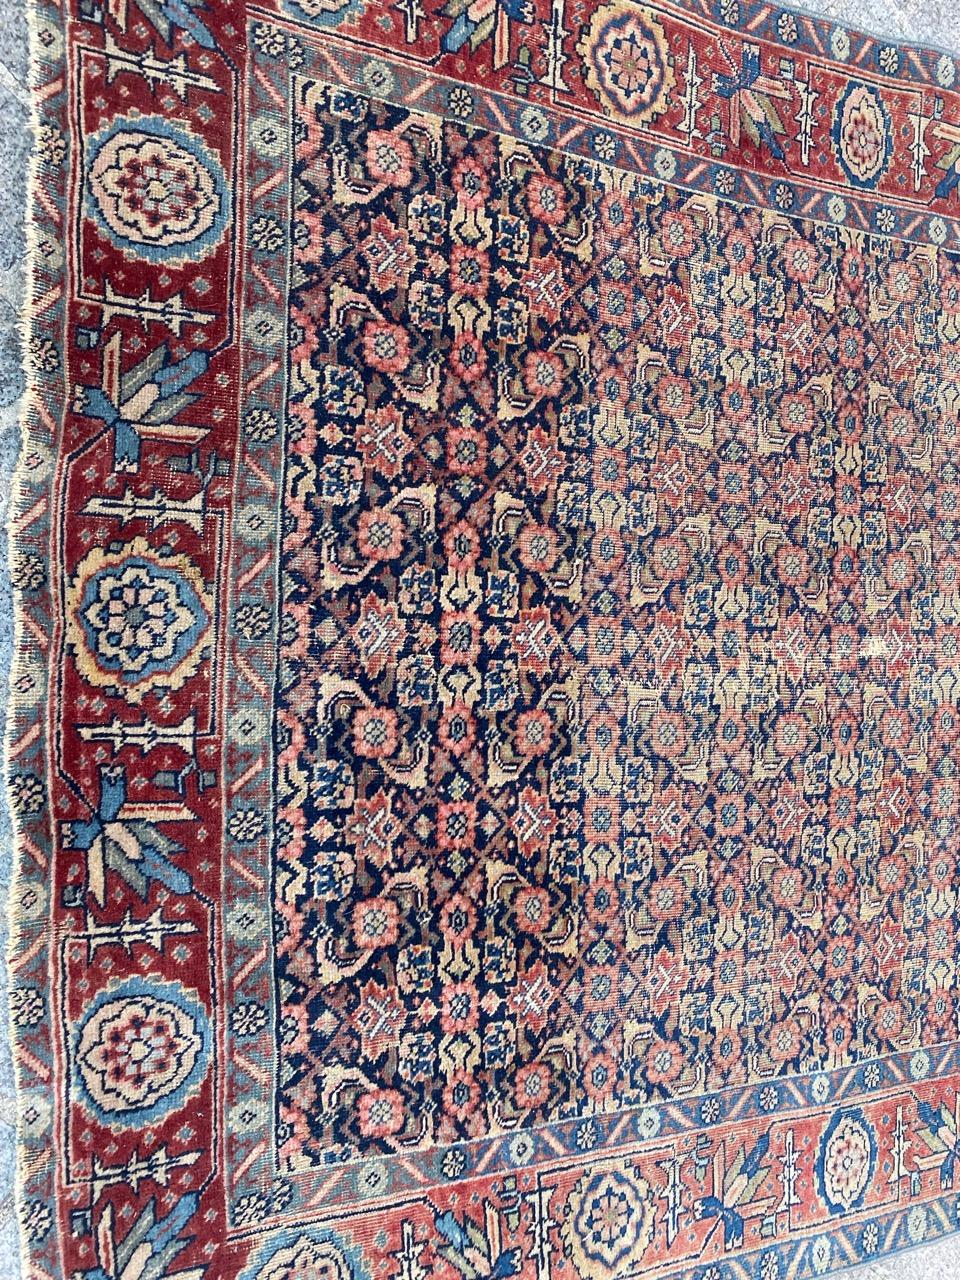 Pretty late 19th century Tabriz rug with beautiful design and nice natural colors, entirely hand knotted with wool velvet on cotton foundation.

✨✨✨
